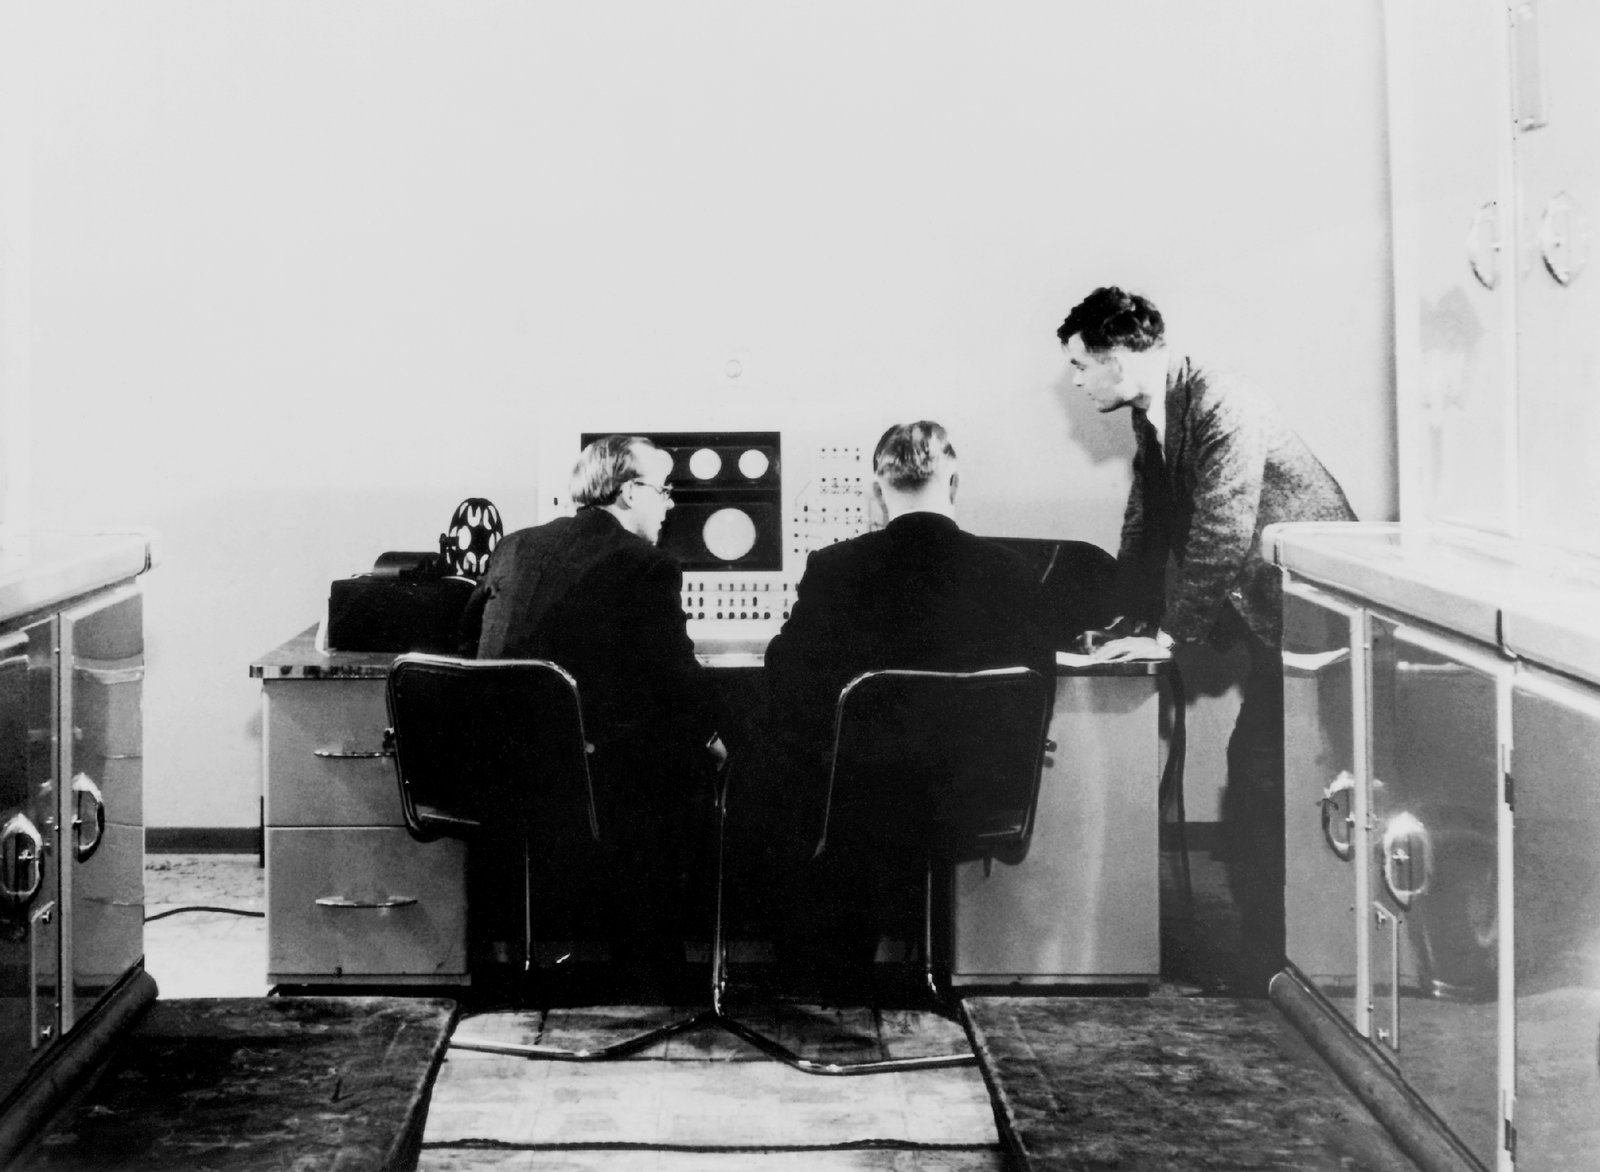 Alan Turing and colleagues at work on the Ferranti Mark I Computer in the UK in 1951. Photo from the Science & Society Picture Library via Getty Images.